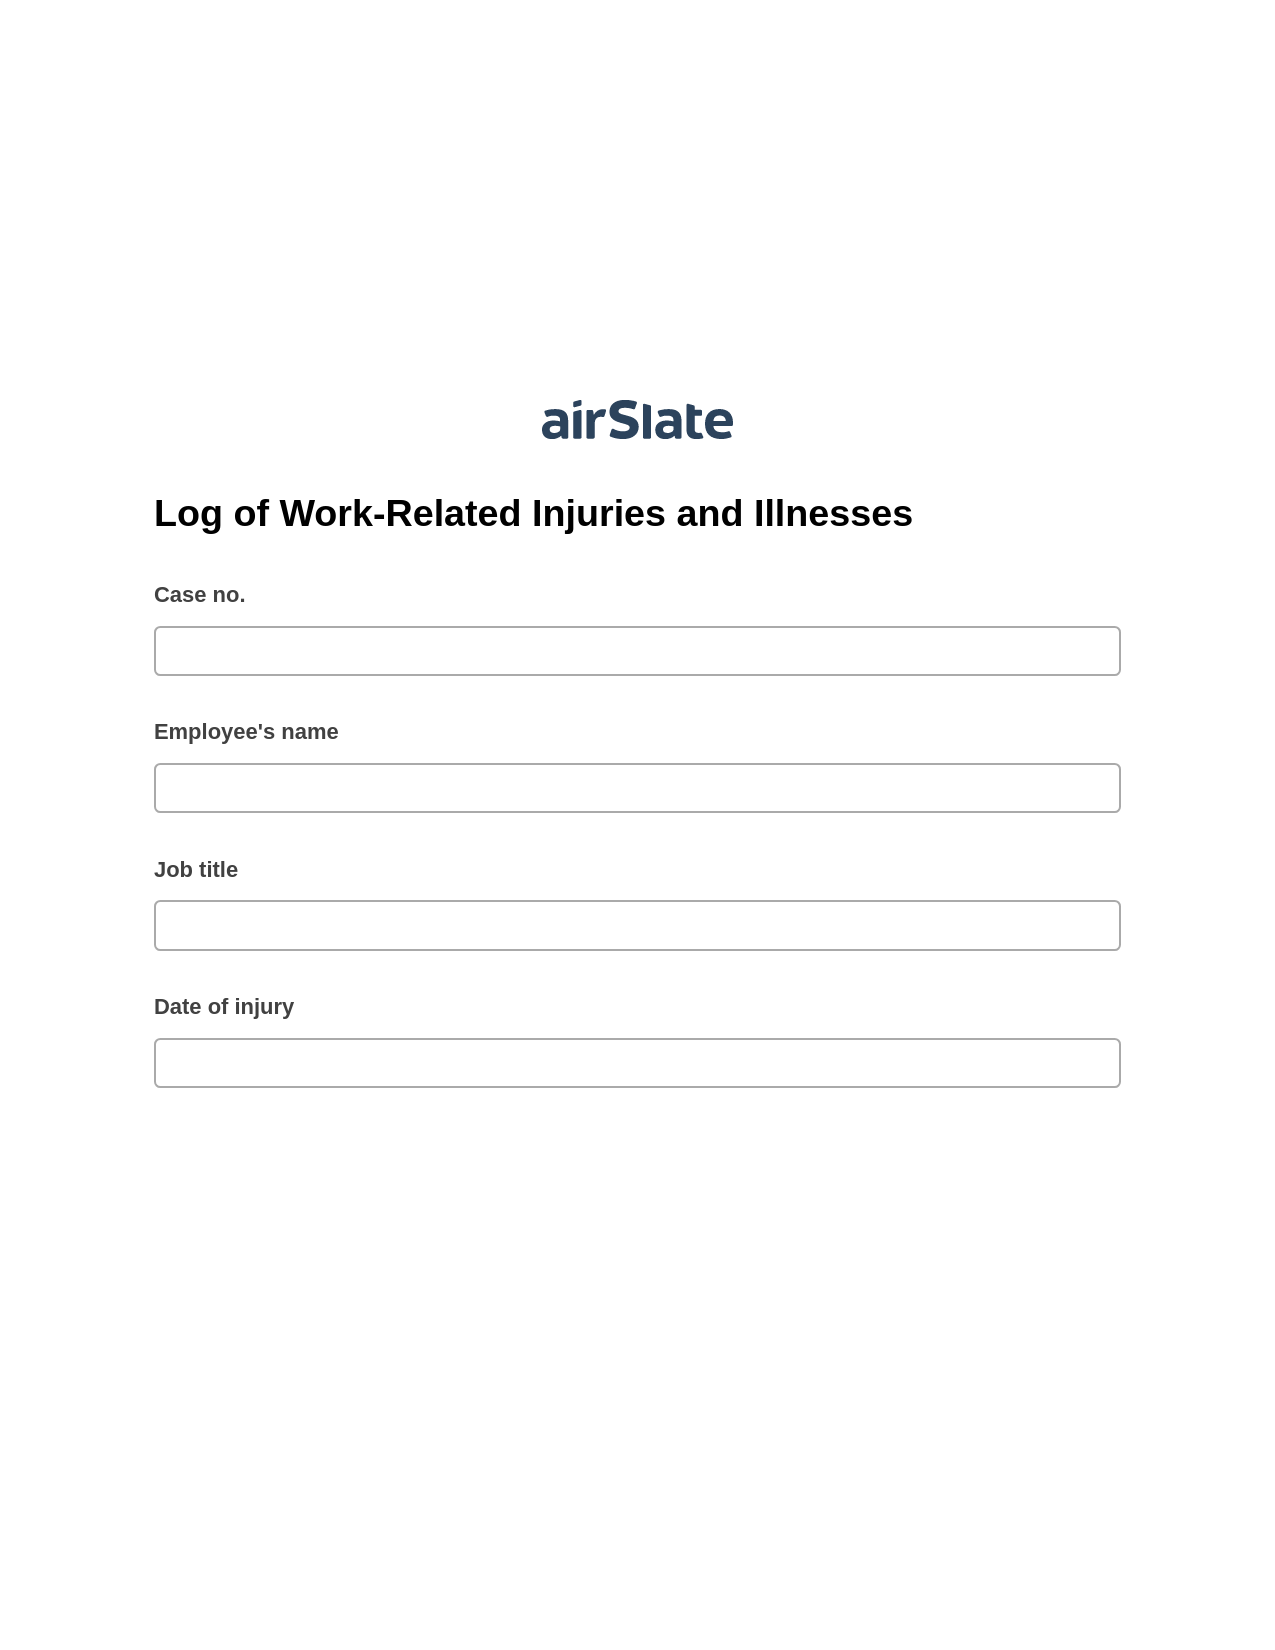 Log of Work-Related Injuries and Illnesses Pre-fill from NetSuite Records Bot, Remove Slate Bot, Post-finish Document Bot